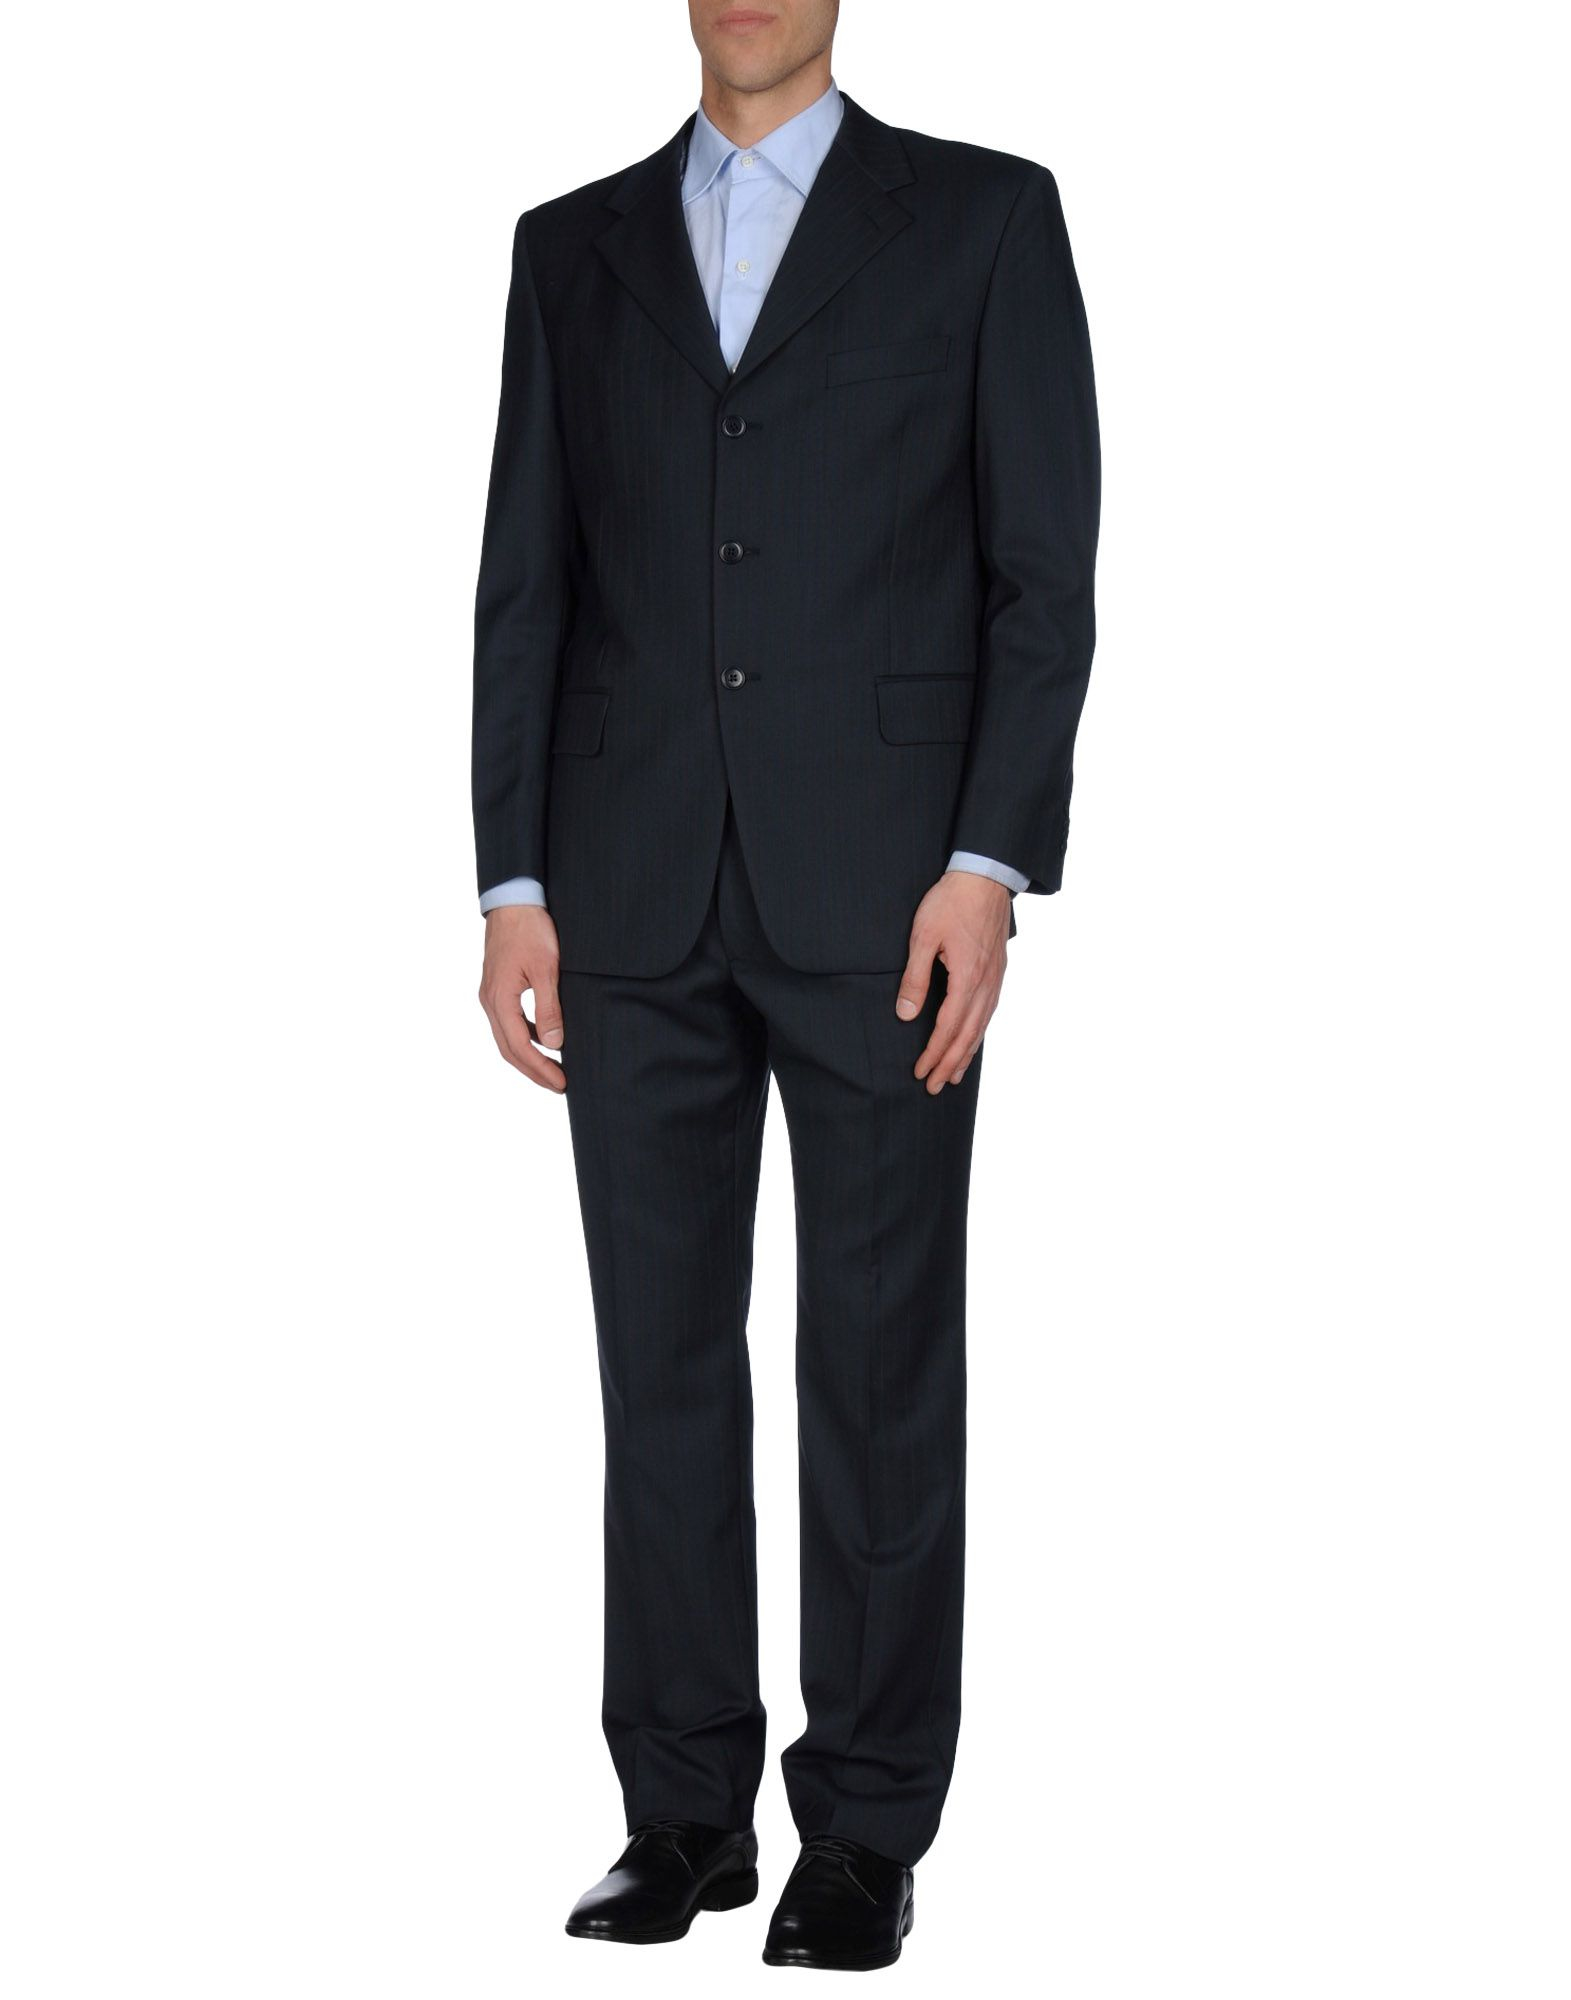 Lyst - Facis Suit in Gray for Men